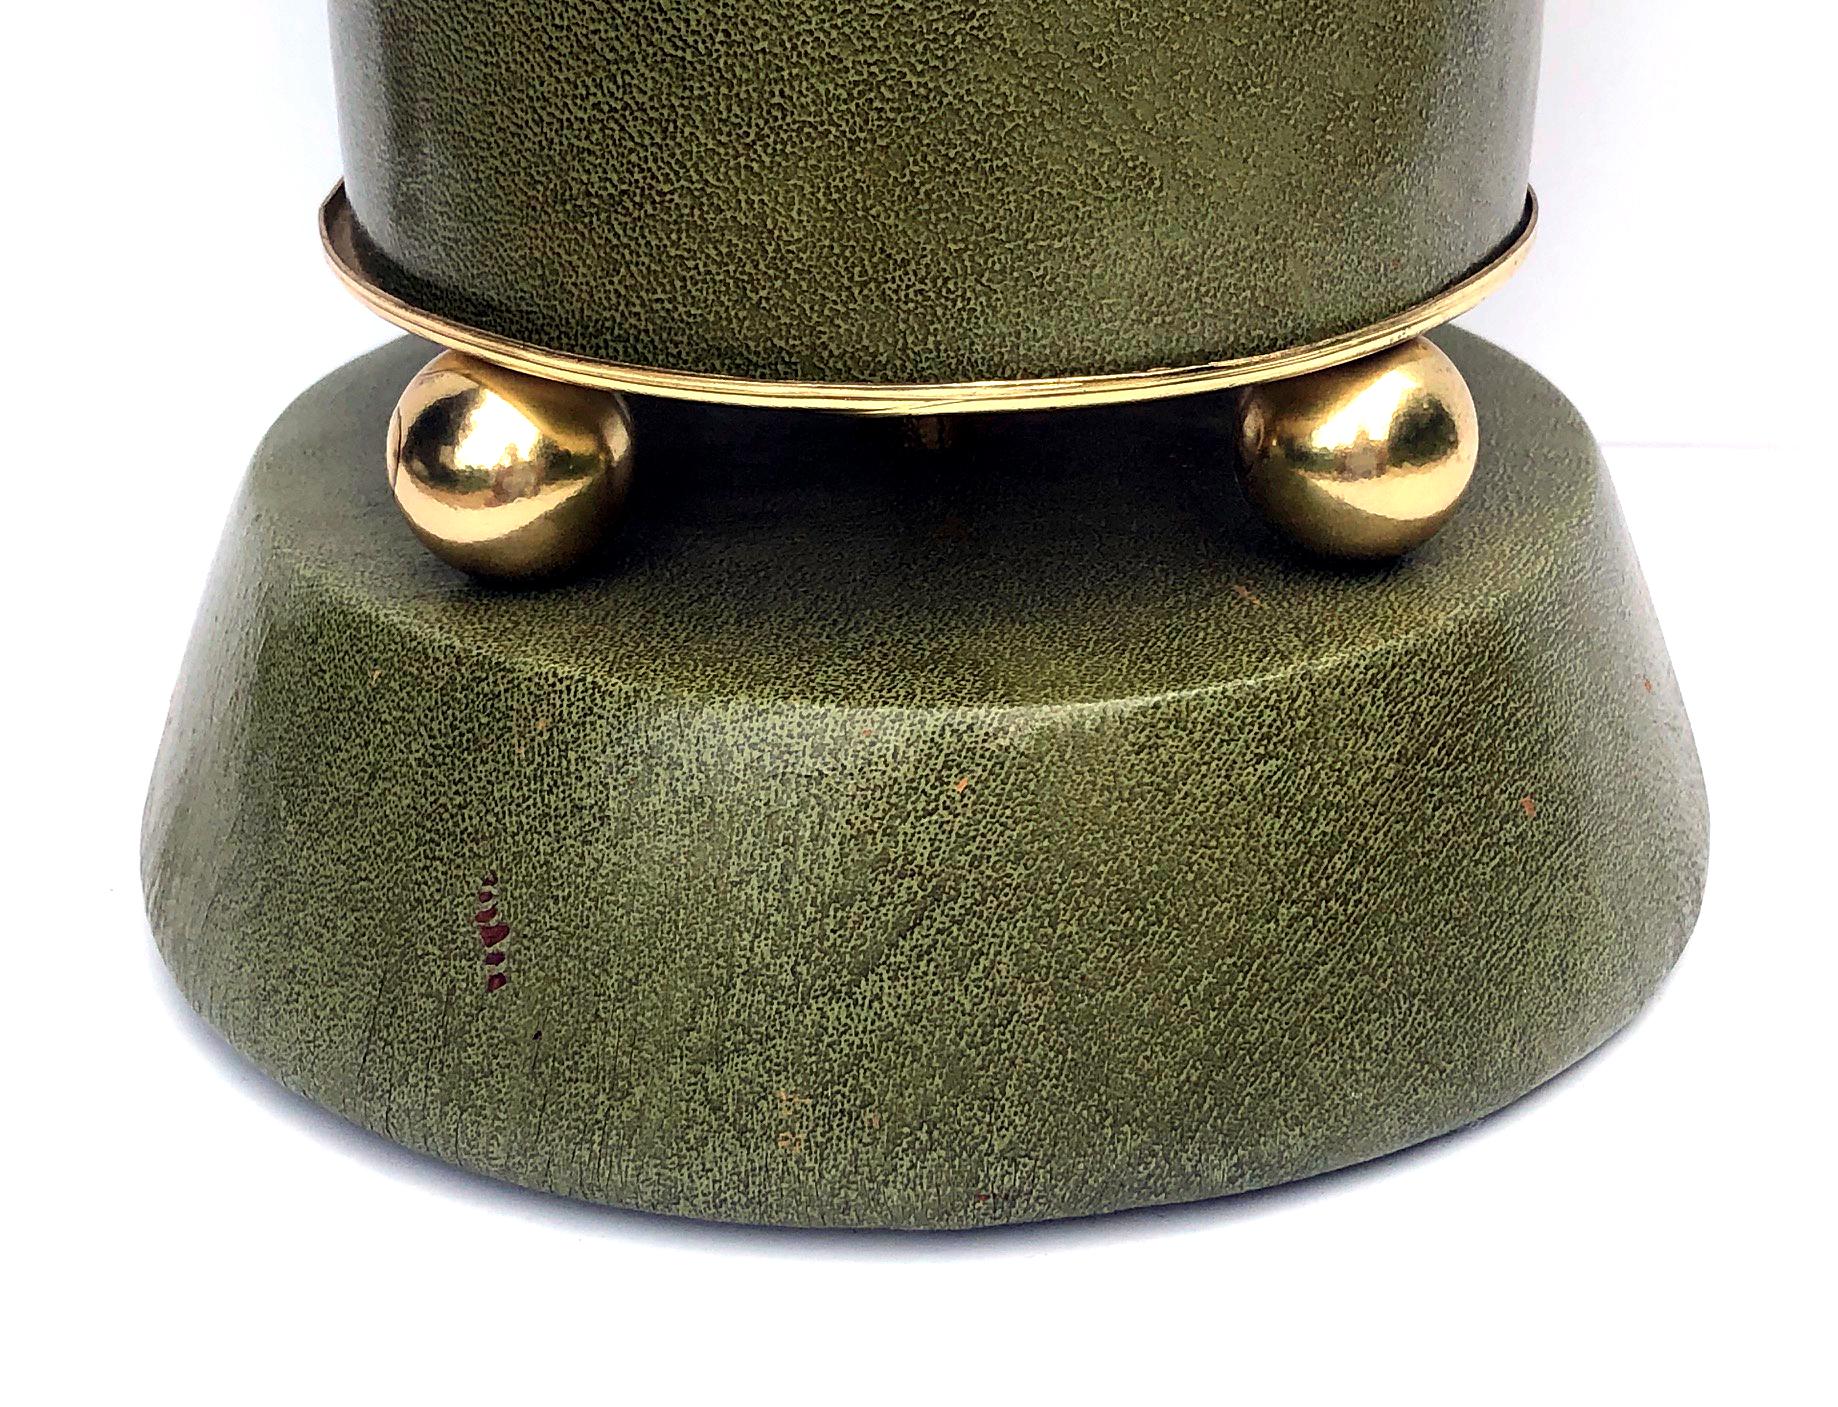 each of cylindrical form covered in a pale green leather fitted with brass spheres all over a canted base.